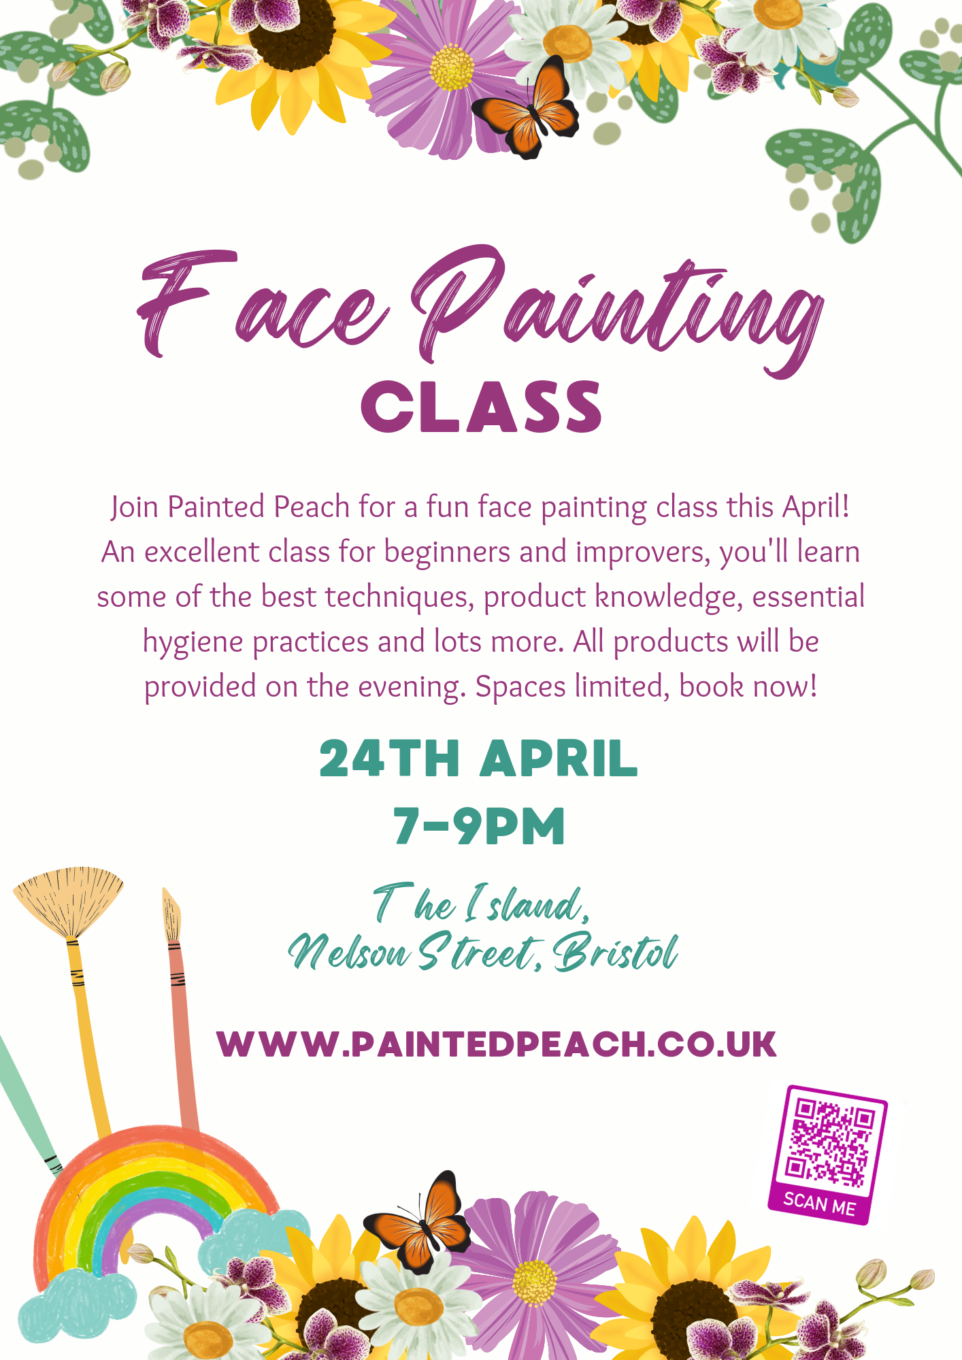 Poster design advertising a Face painting class featuring rainbows, flowers and paint brushes